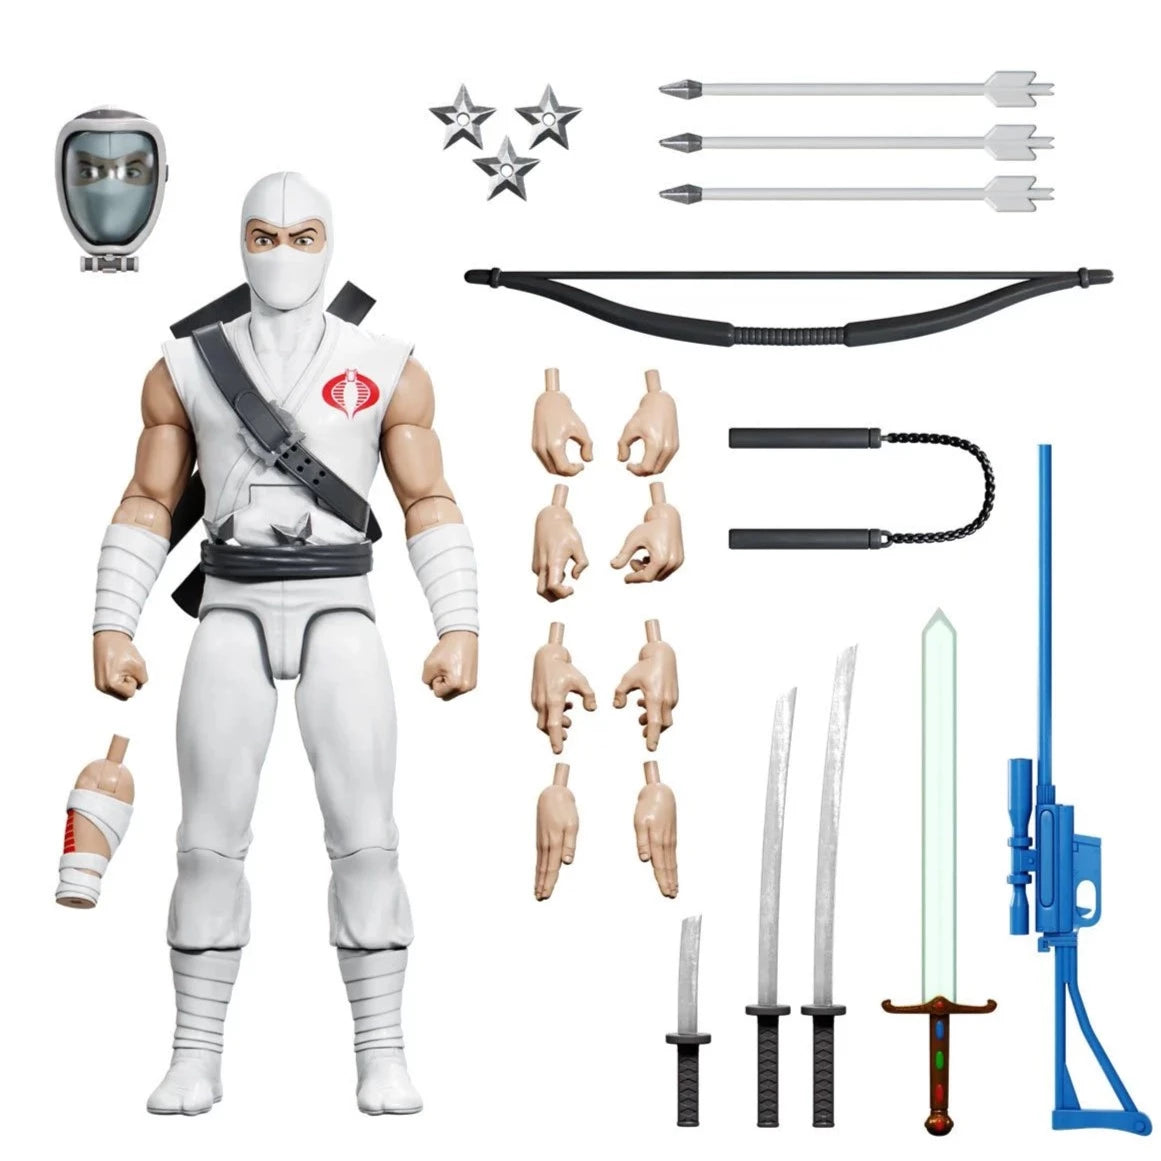 G.I. Joe Ultimates Storm Shadow 7-Inch Action Figure by Super7 -Super7 - India - www.superherotoystore.com